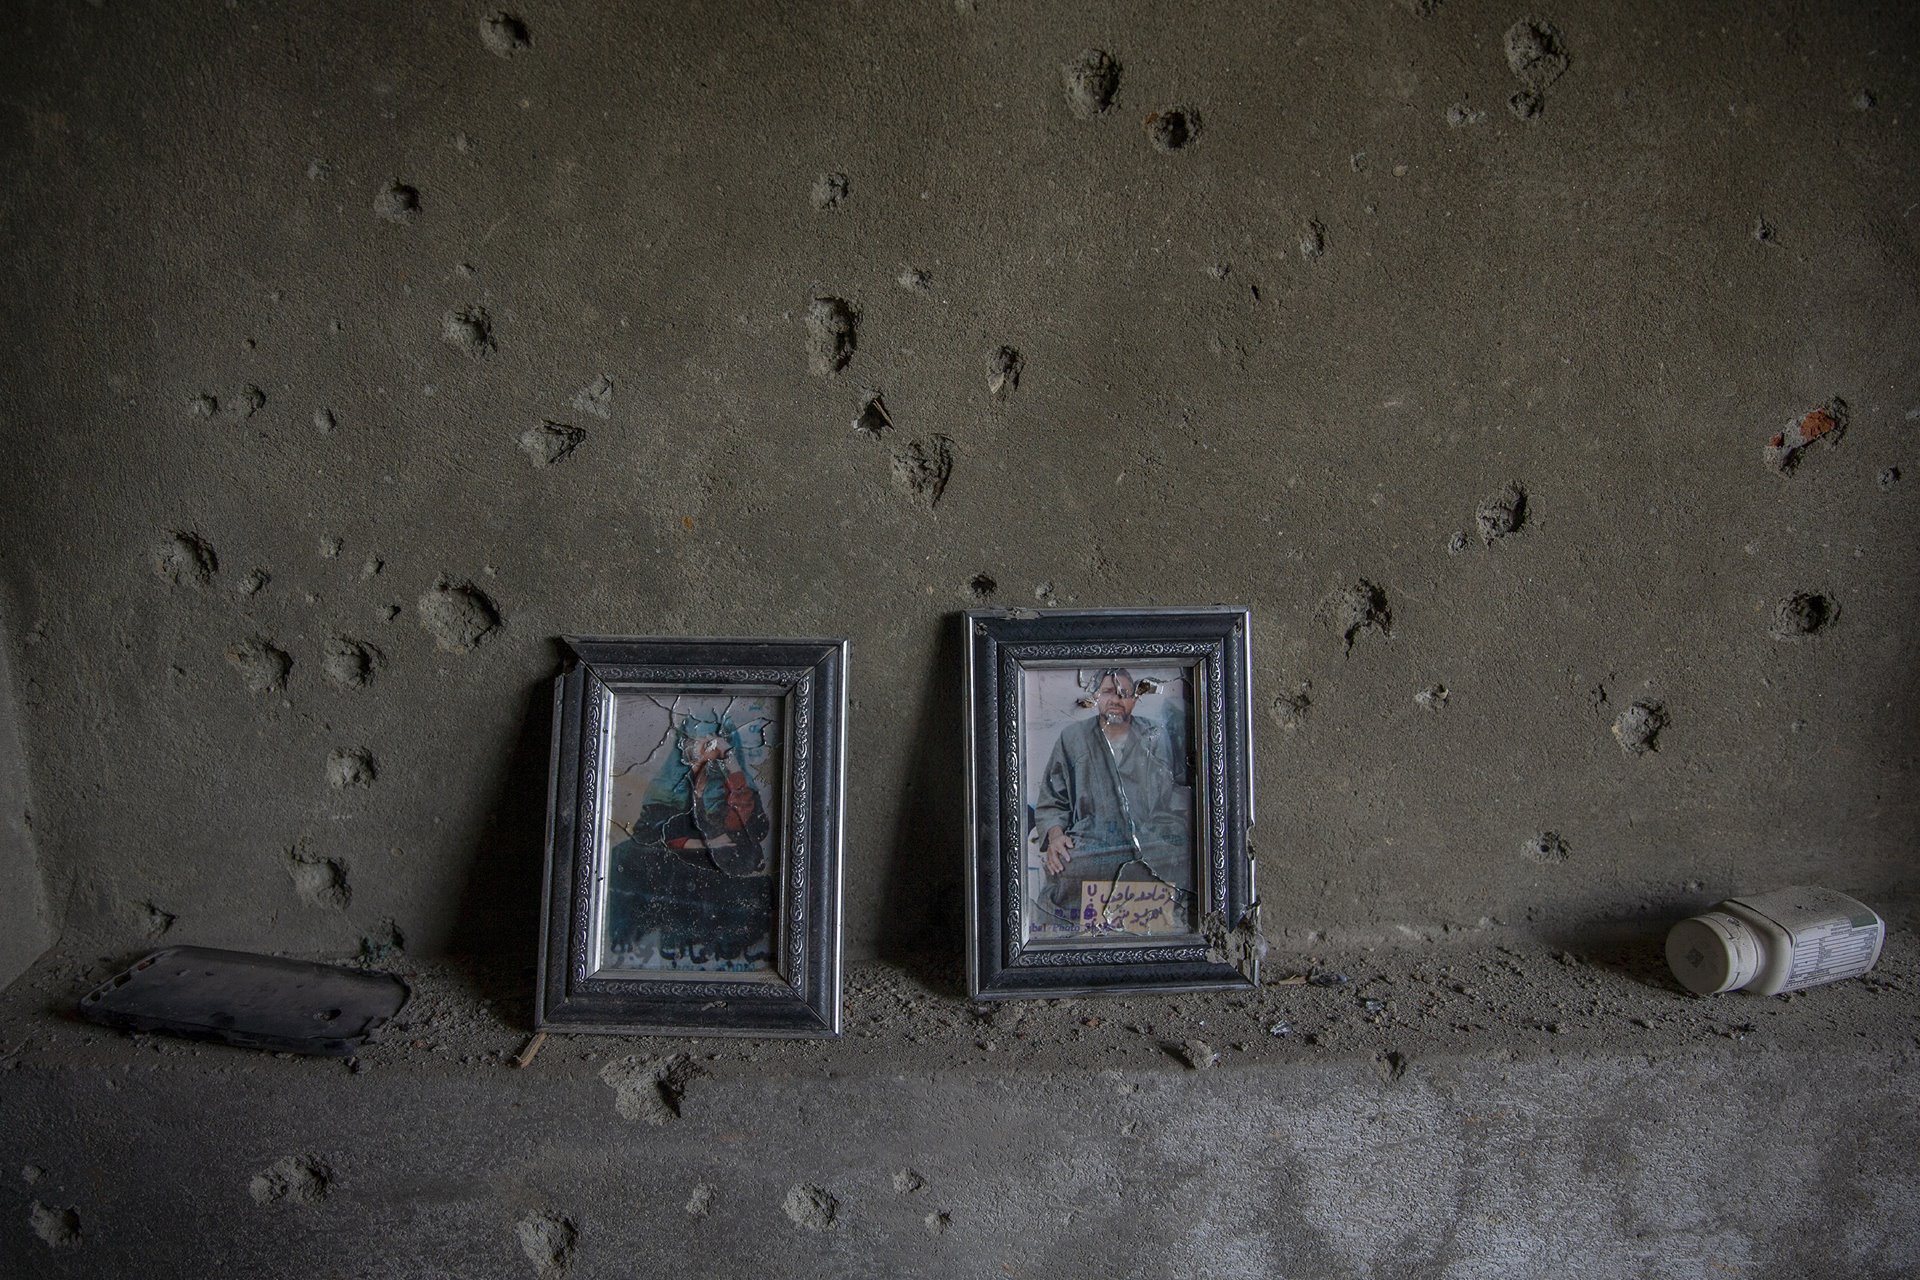 Photographs of Kashmiri Sufi saints are seen on the bullet-ridden wall of a house damaged in a gunfight in Srinagar, in India-administered Kashmir. Officials said two suspected militants were killed in the shoot-out.